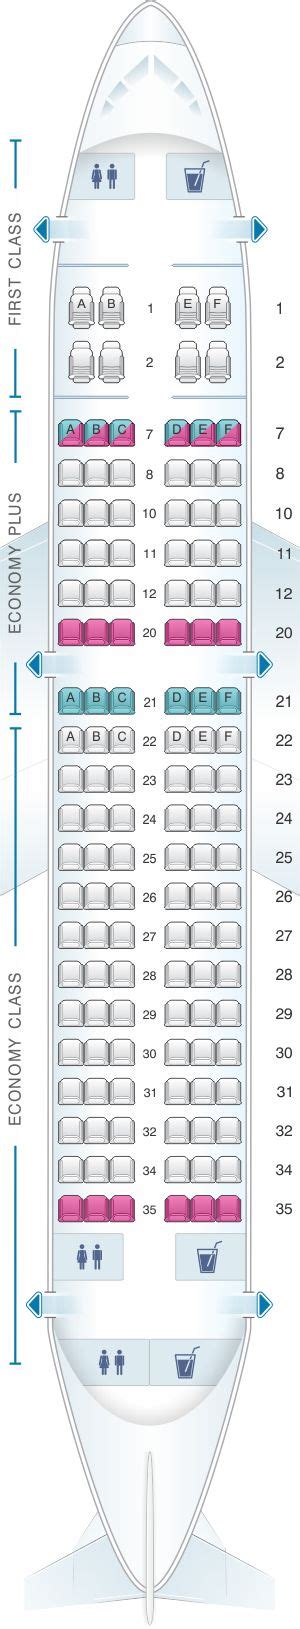 Seat Map United Airlines Airbus A319 Version 1 Azerbaijan Airlines